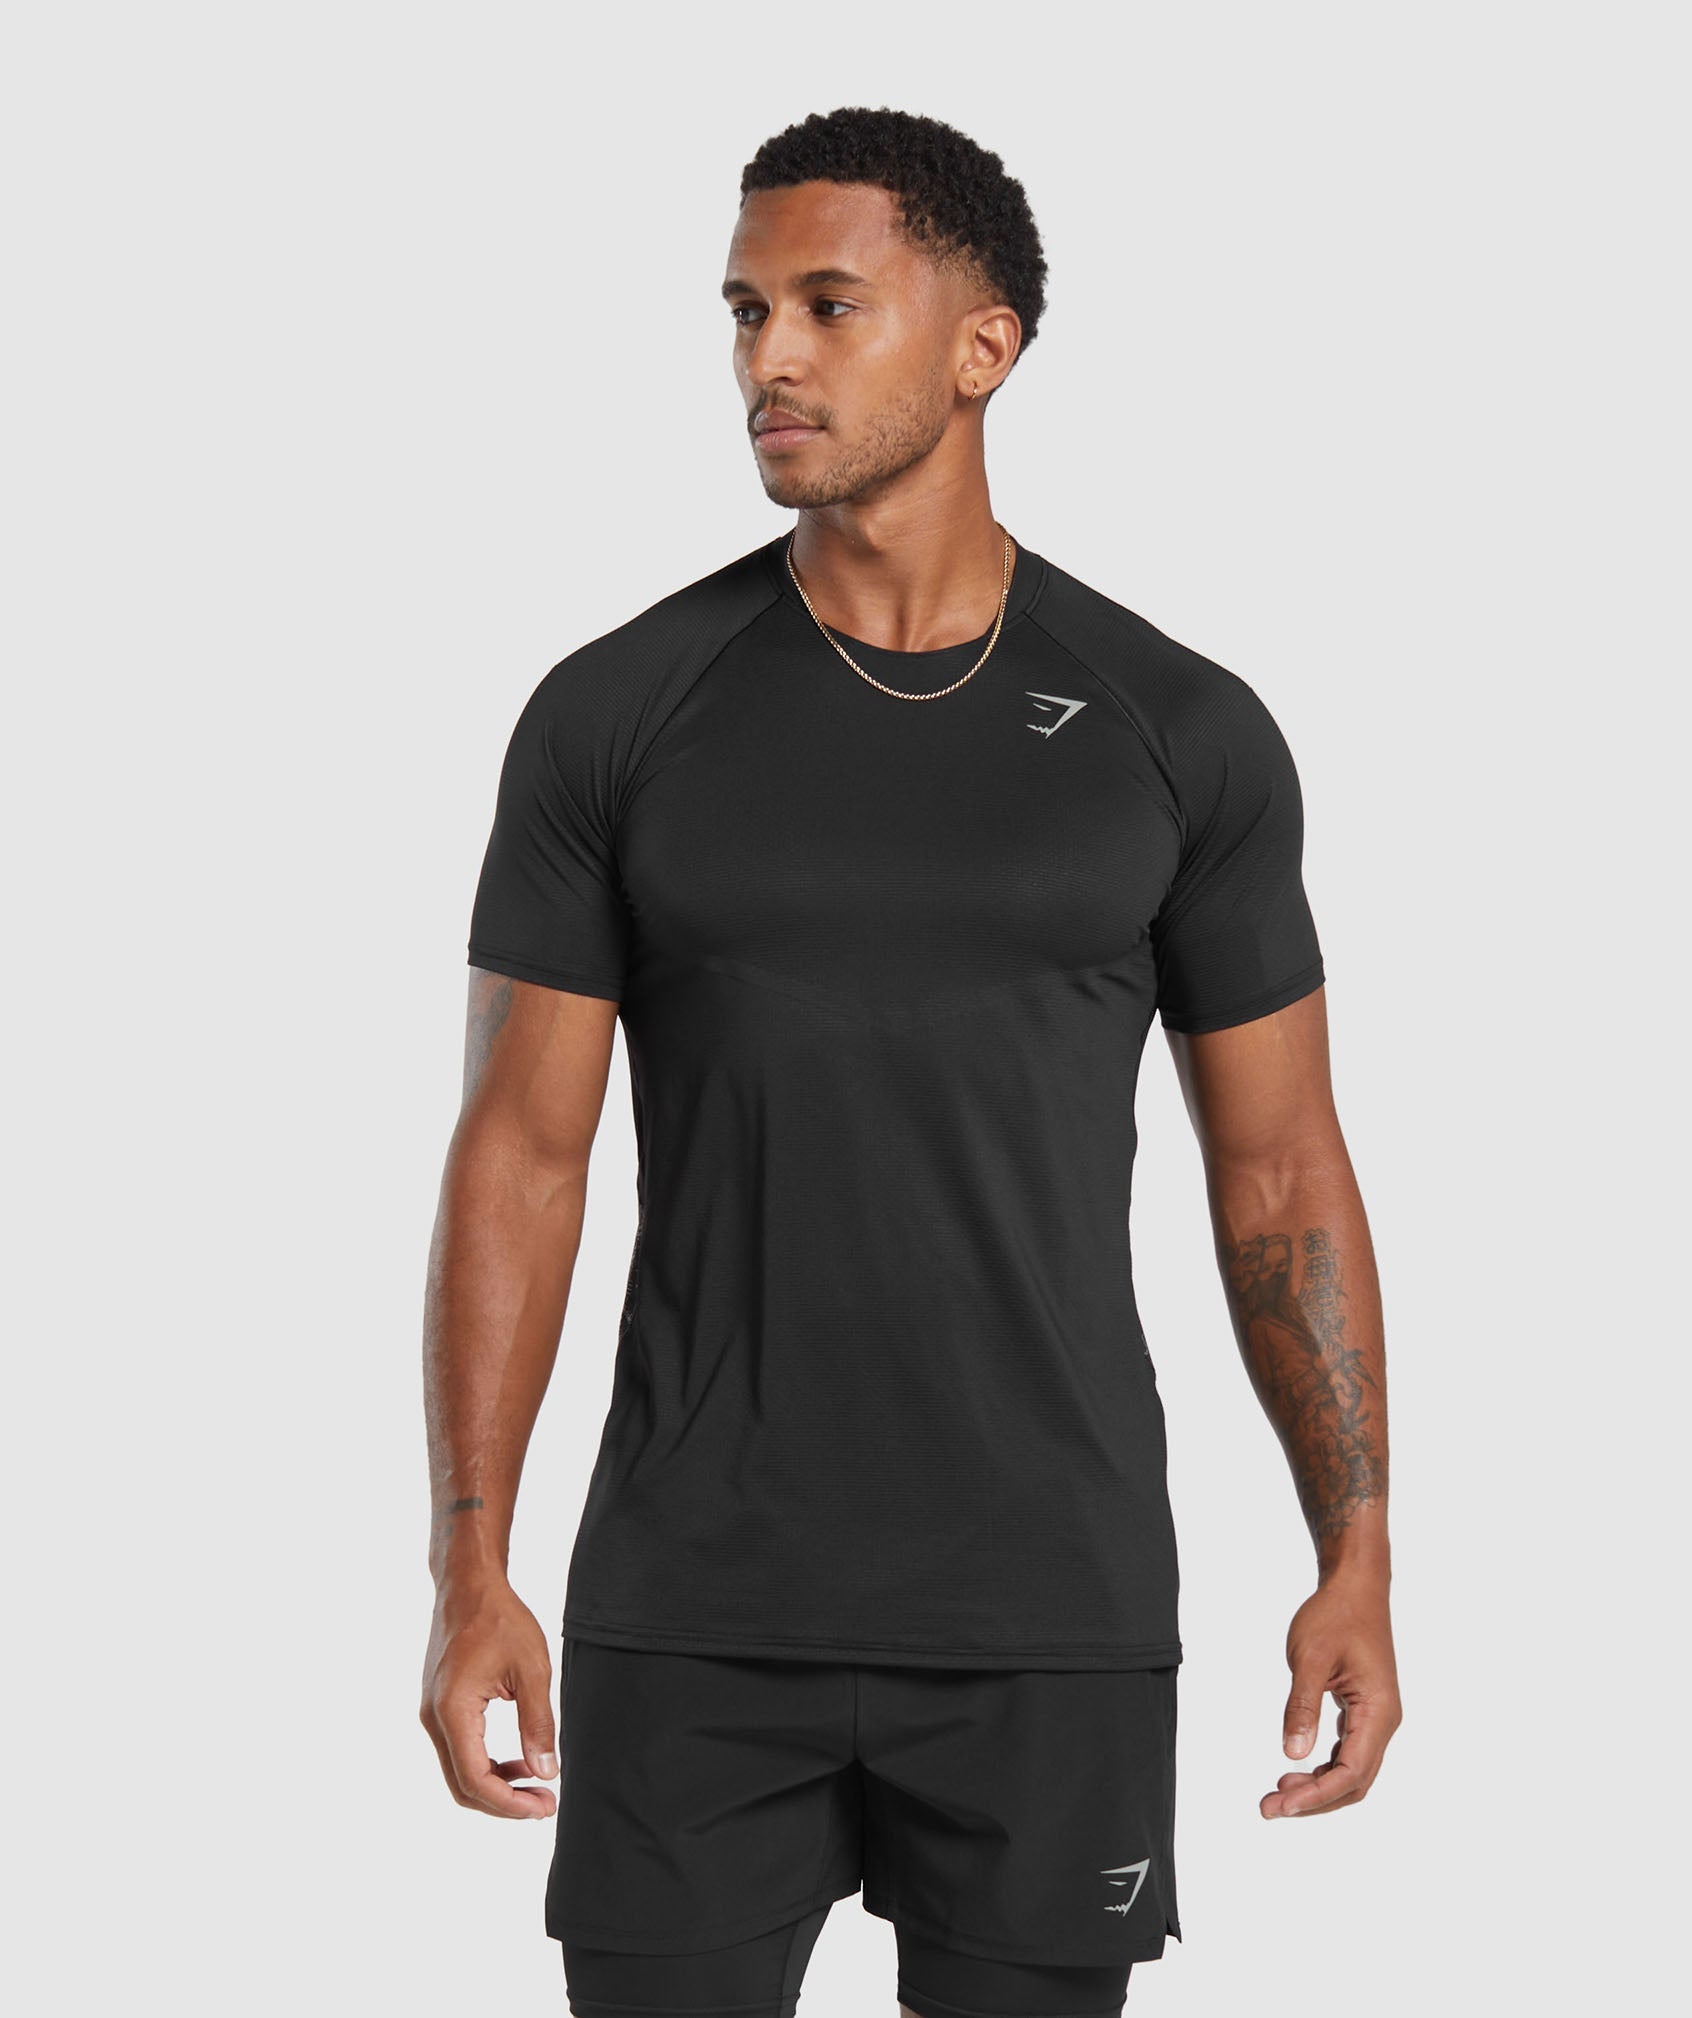 Men's Speed Collection, Running Clothes For Men